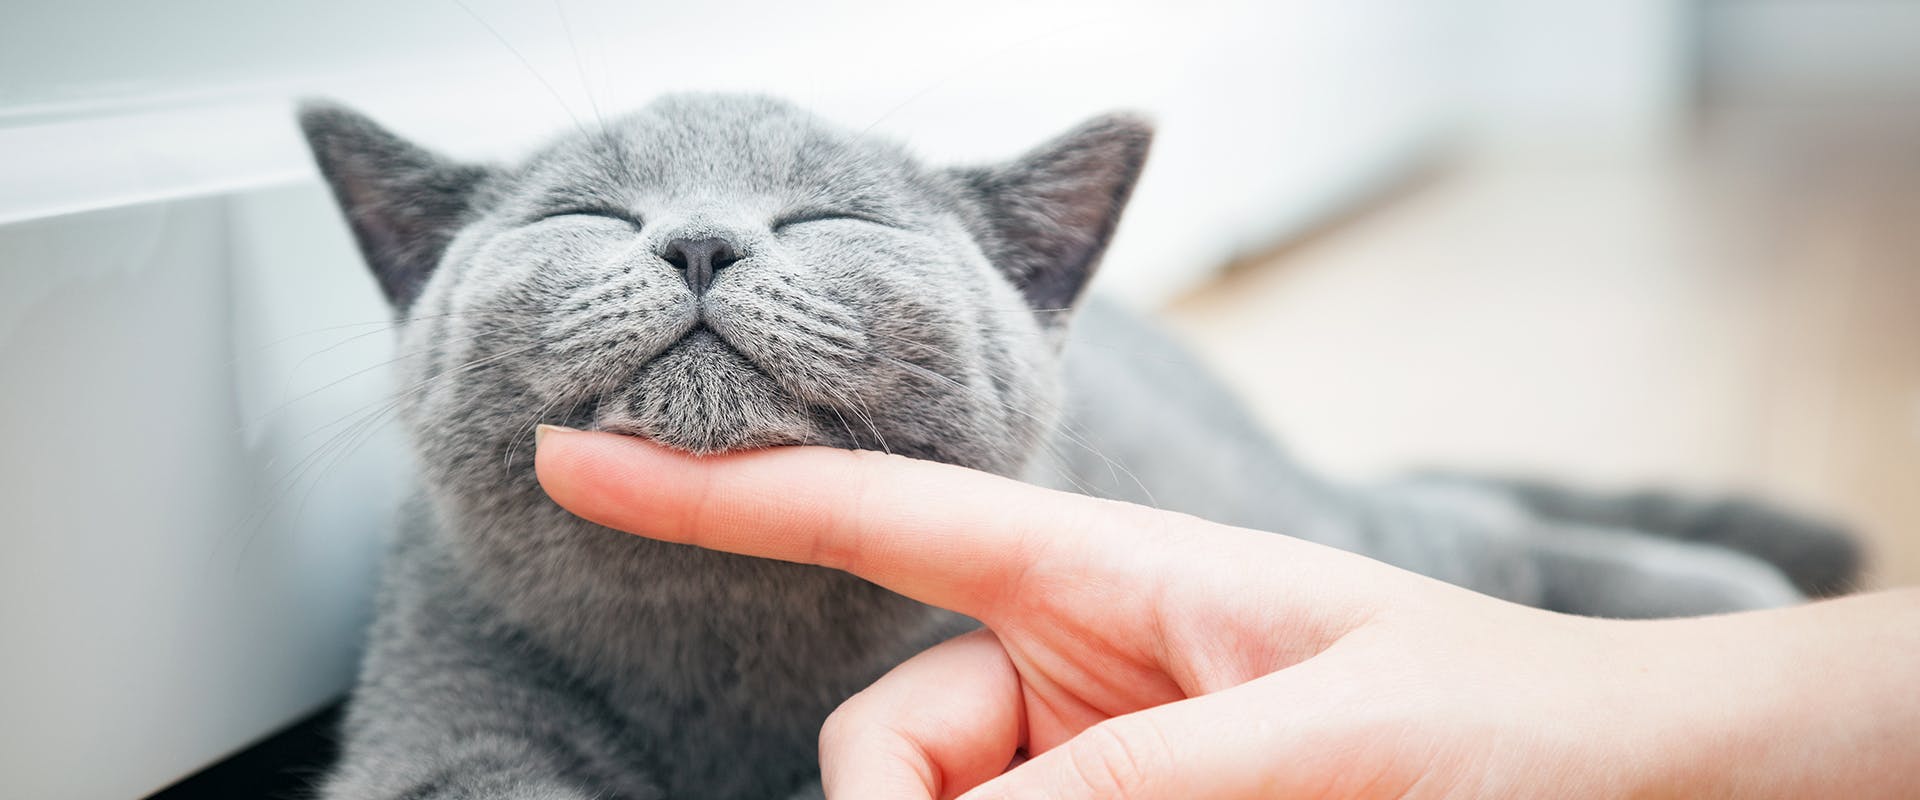 A hand scratching the chin of a fluffy grey cat